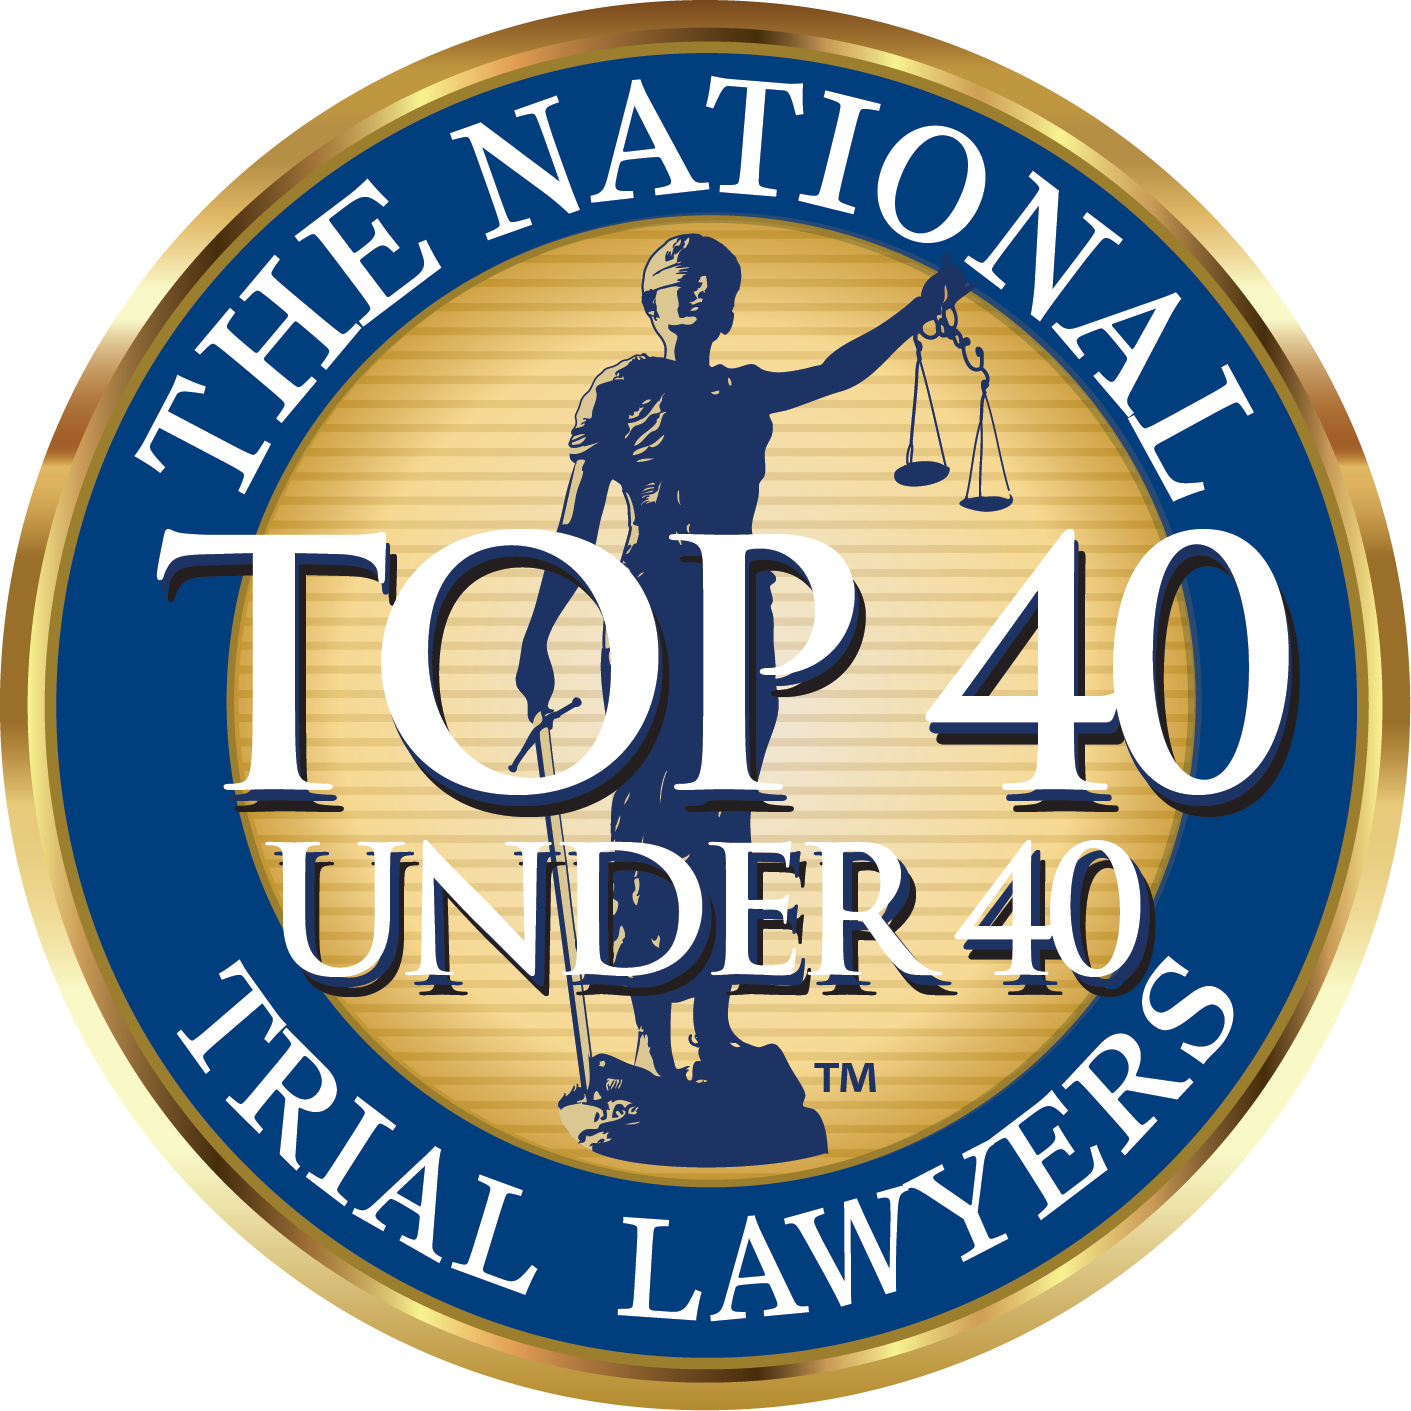 The National Trial Lawyers - Top 40 under 40